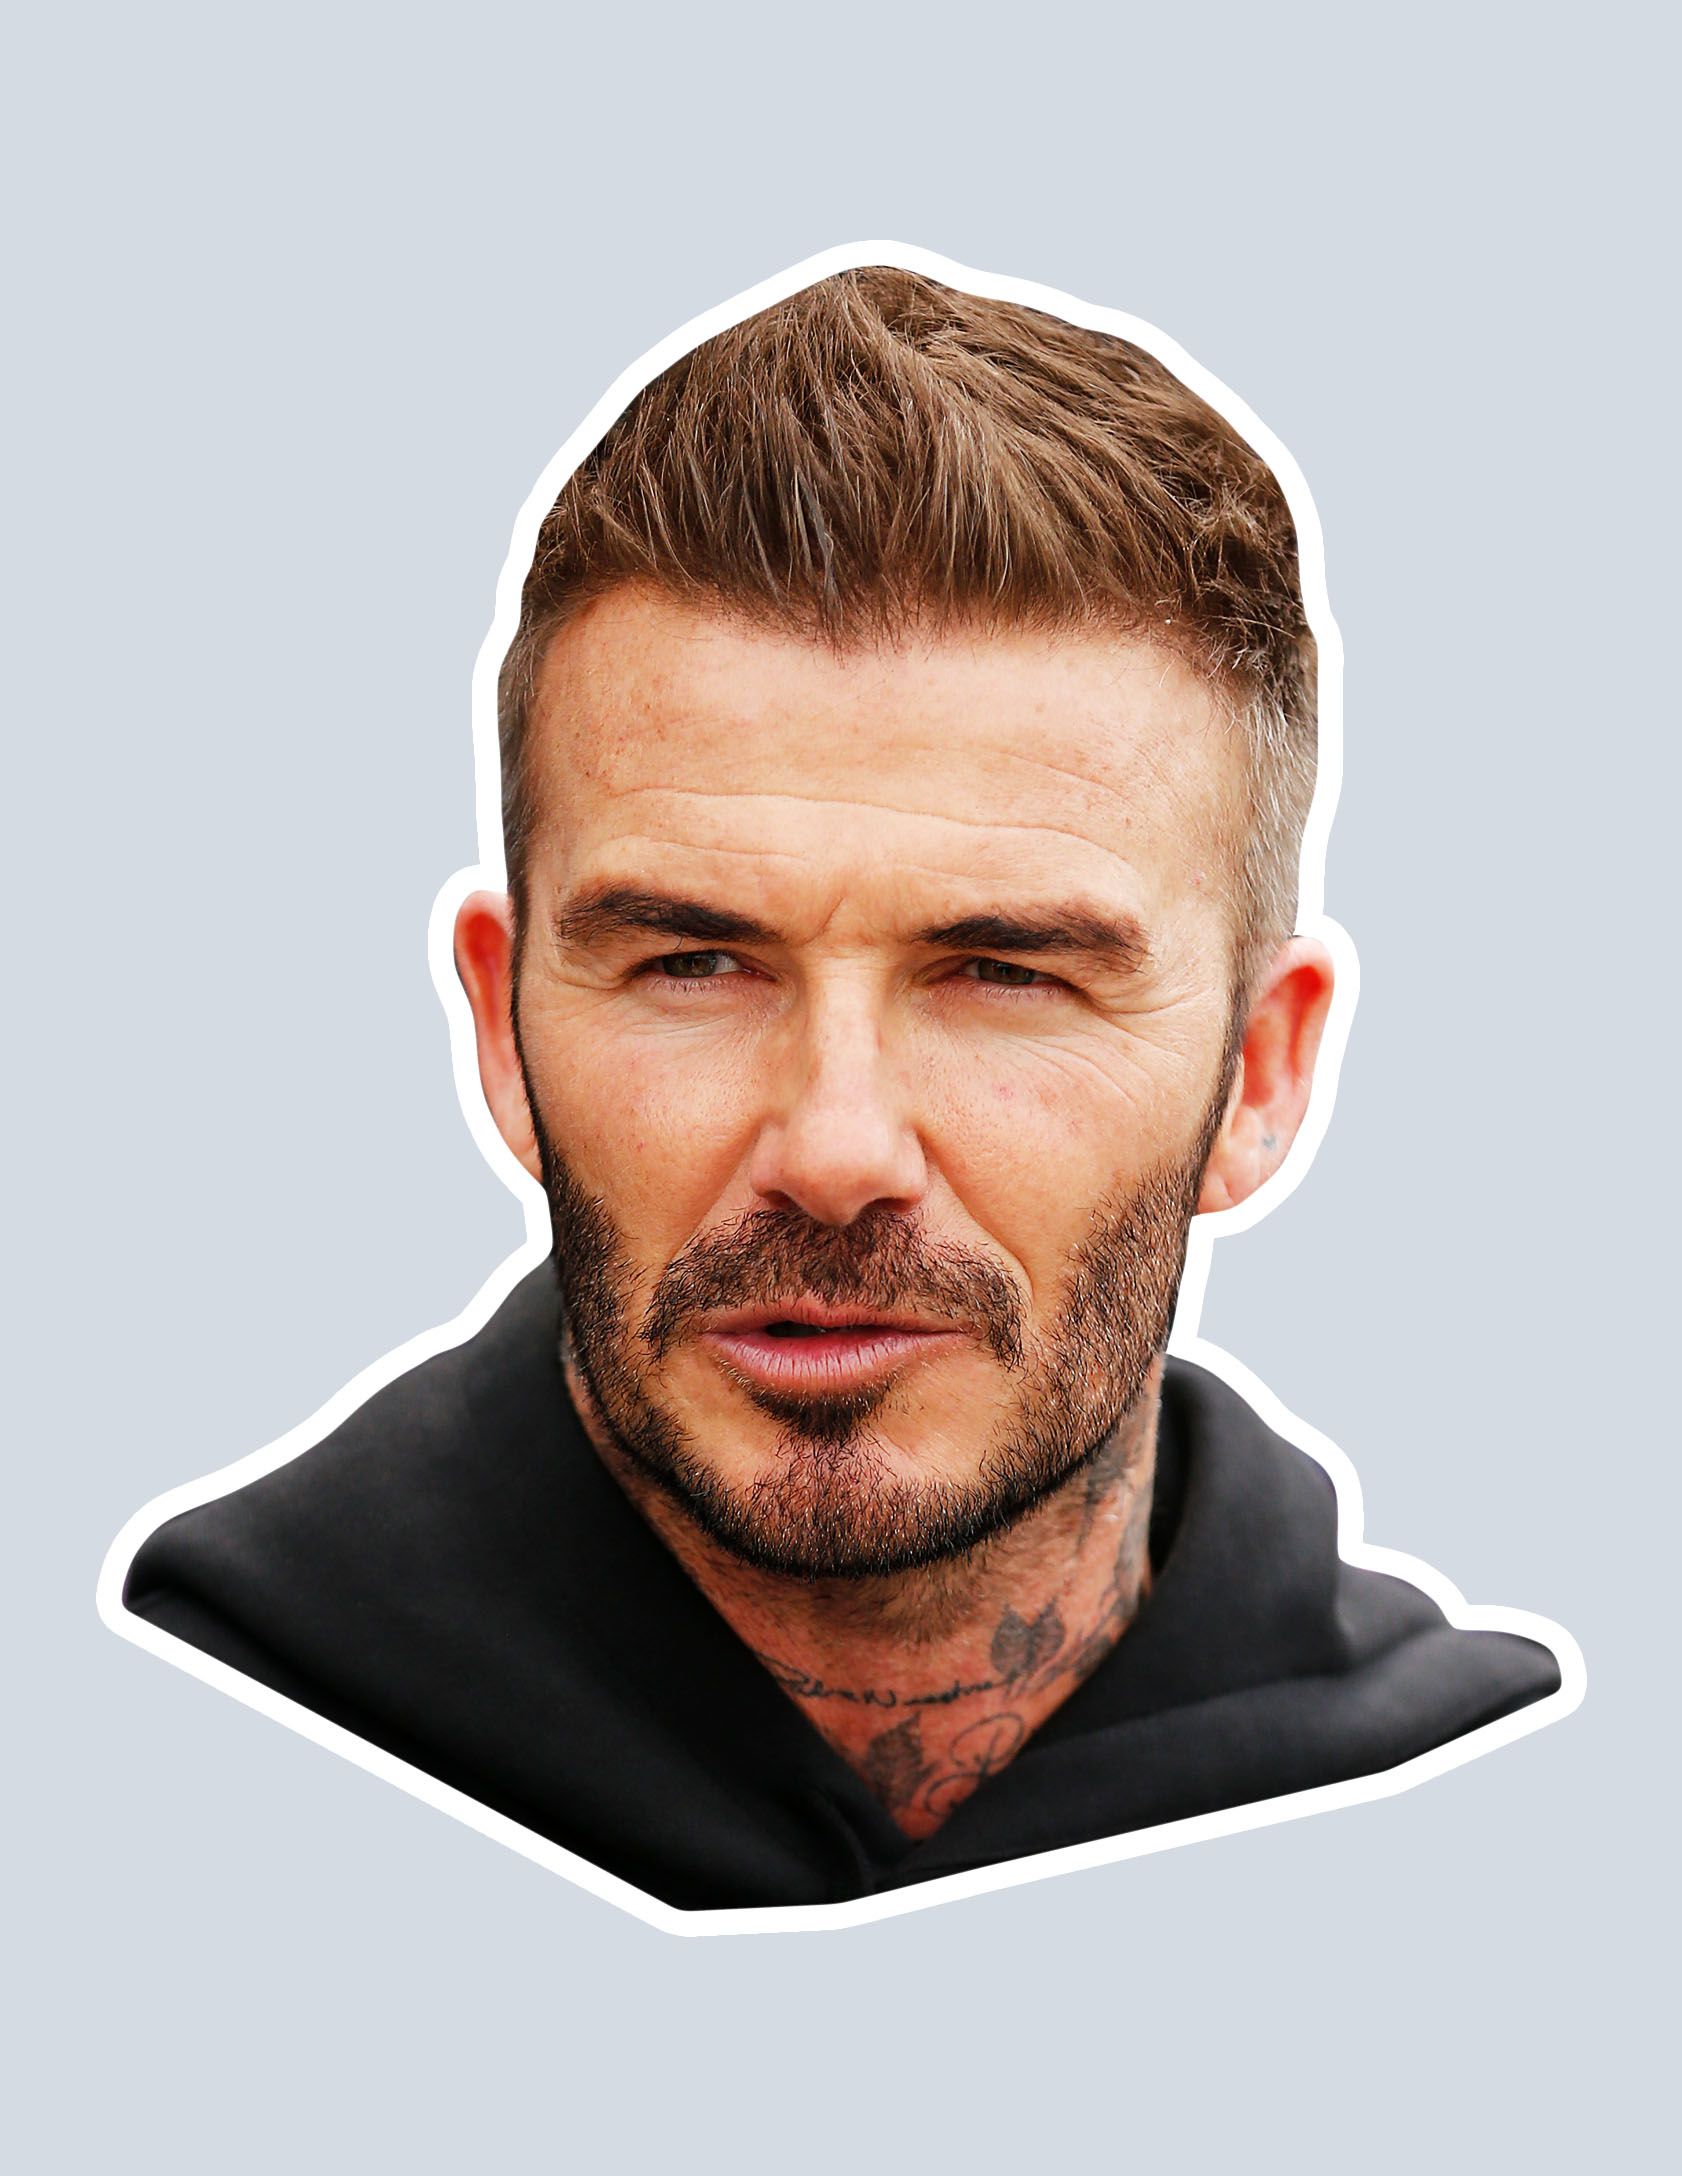 5 Oblong Face Shape Hairstyles for Men in 2022